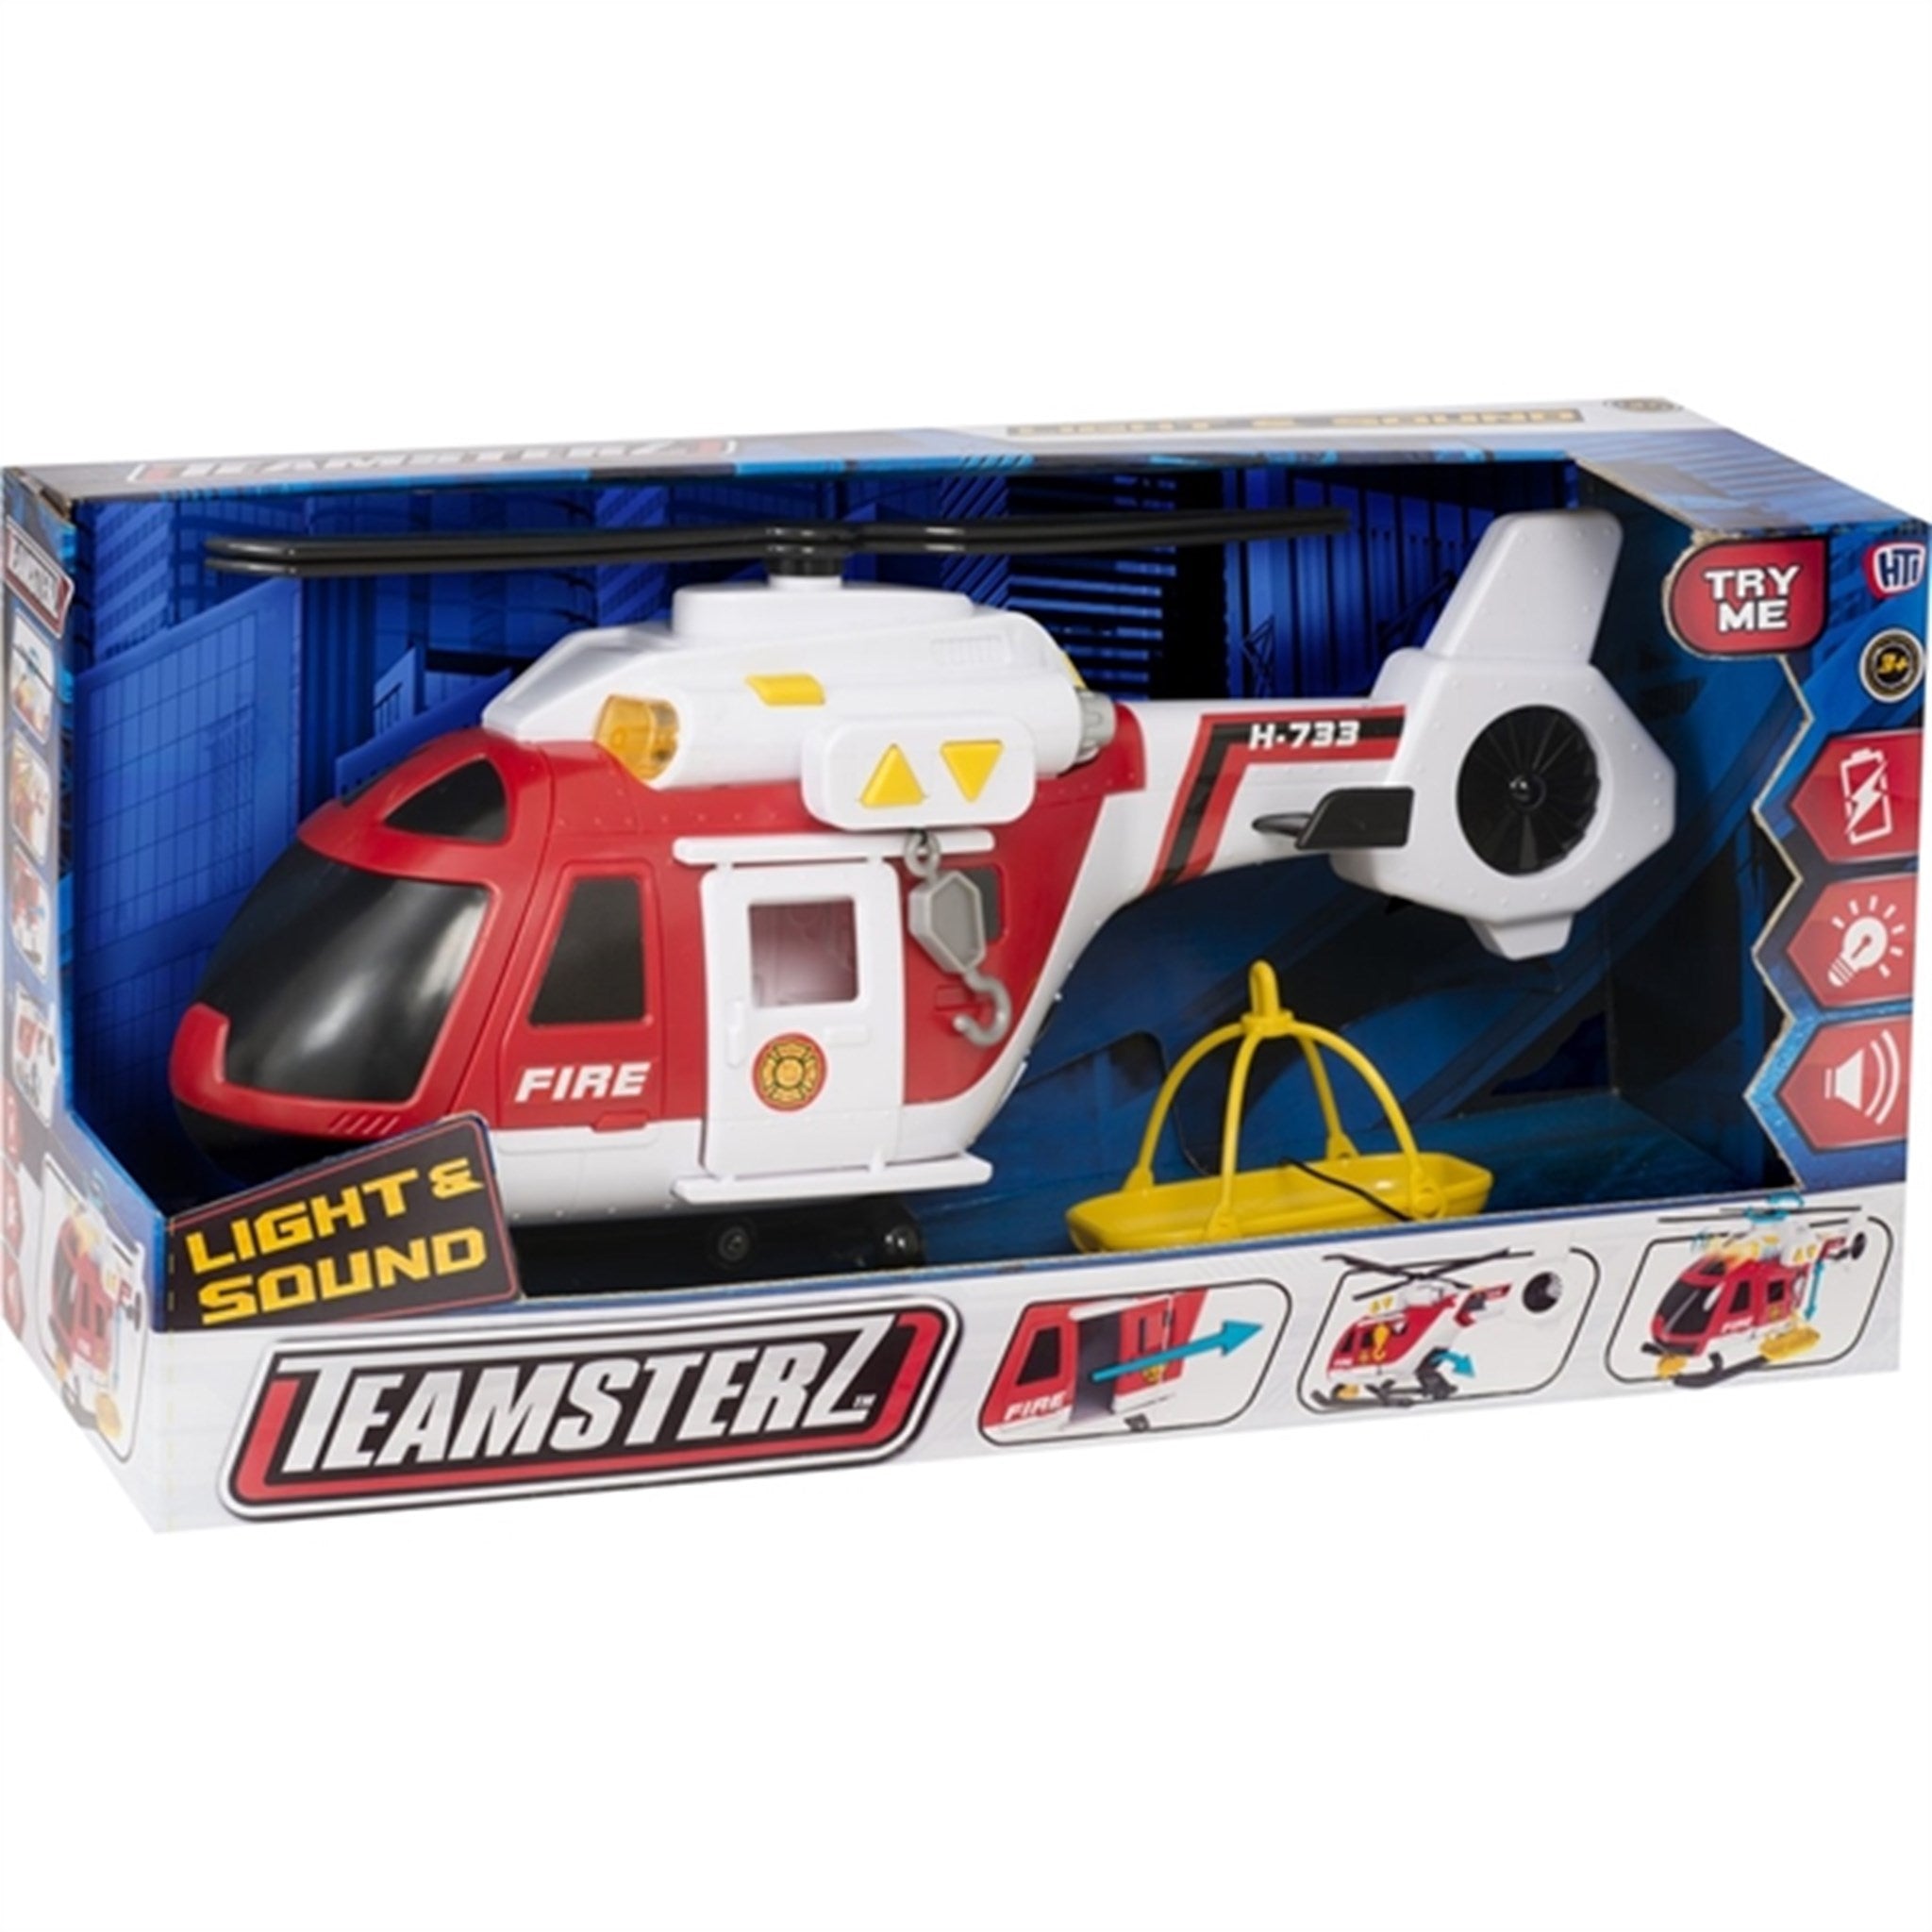 Teamsterz Large L&S Fire Helicopter 2